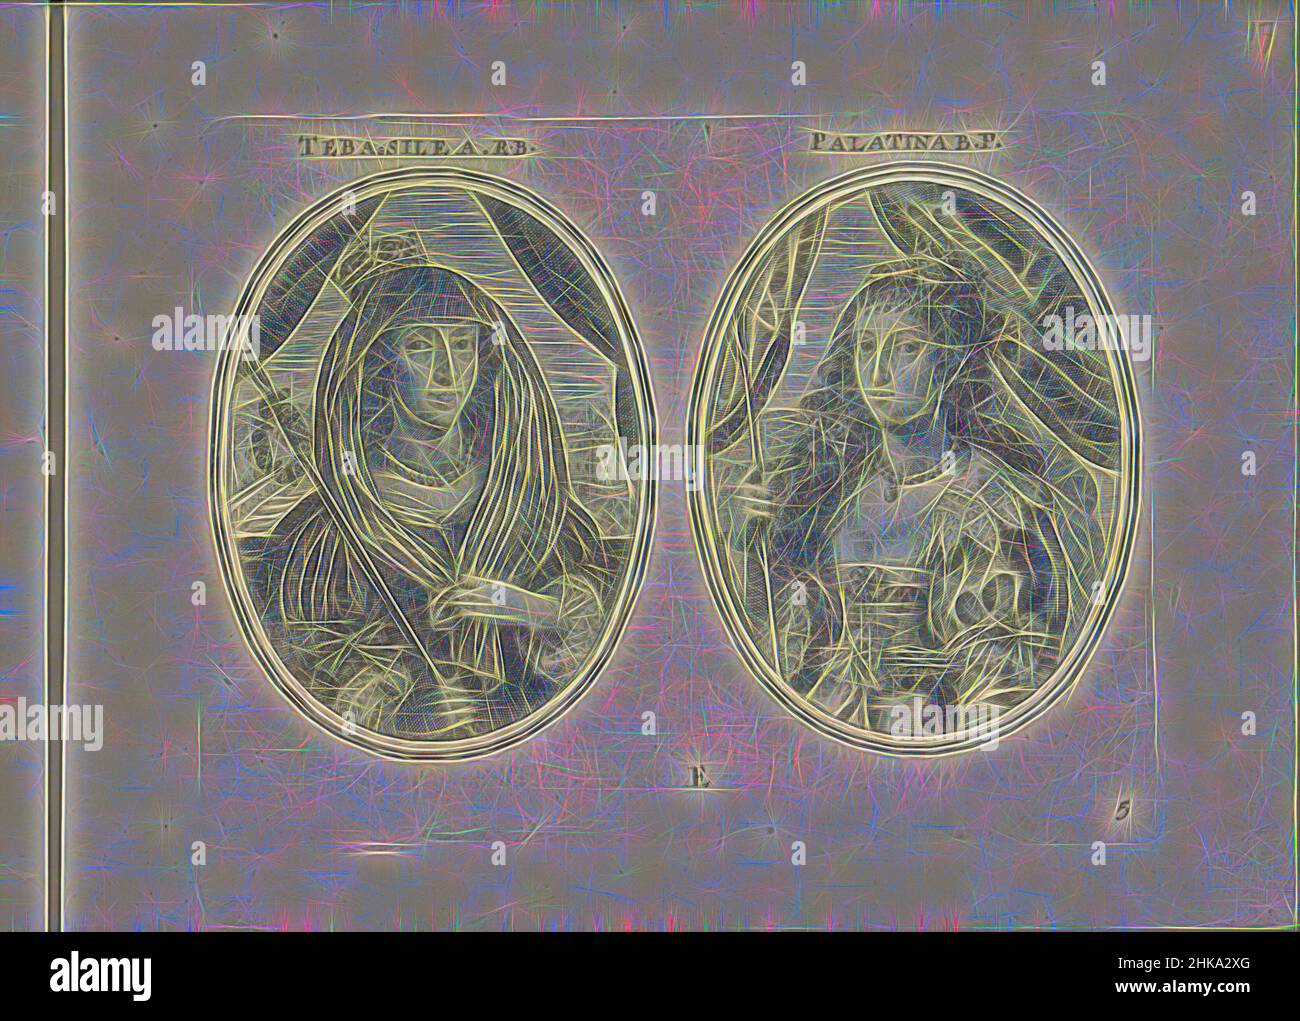 Inspired by Portraits of Elisabeth Stuart and Louisa Juliana, both as shepherdesses, Tebassilea R.B., Palatina B.P., Les vrais pourtraits de quelques unes des plus grandes dames de la chrestiente desguisees en bergeres., Two representations on an album leaf. On the left, portrait Elisabeth Stuart of, Reimagined by Artotop. Classic art reinvented with a modern twist. Design of warm cheerful glowing of brightness and light ray radiance. Photography inspired by surrealism and futurism, embracing dynamic energy of modern technology, movement, speed and revolutionize culture Stock Photo